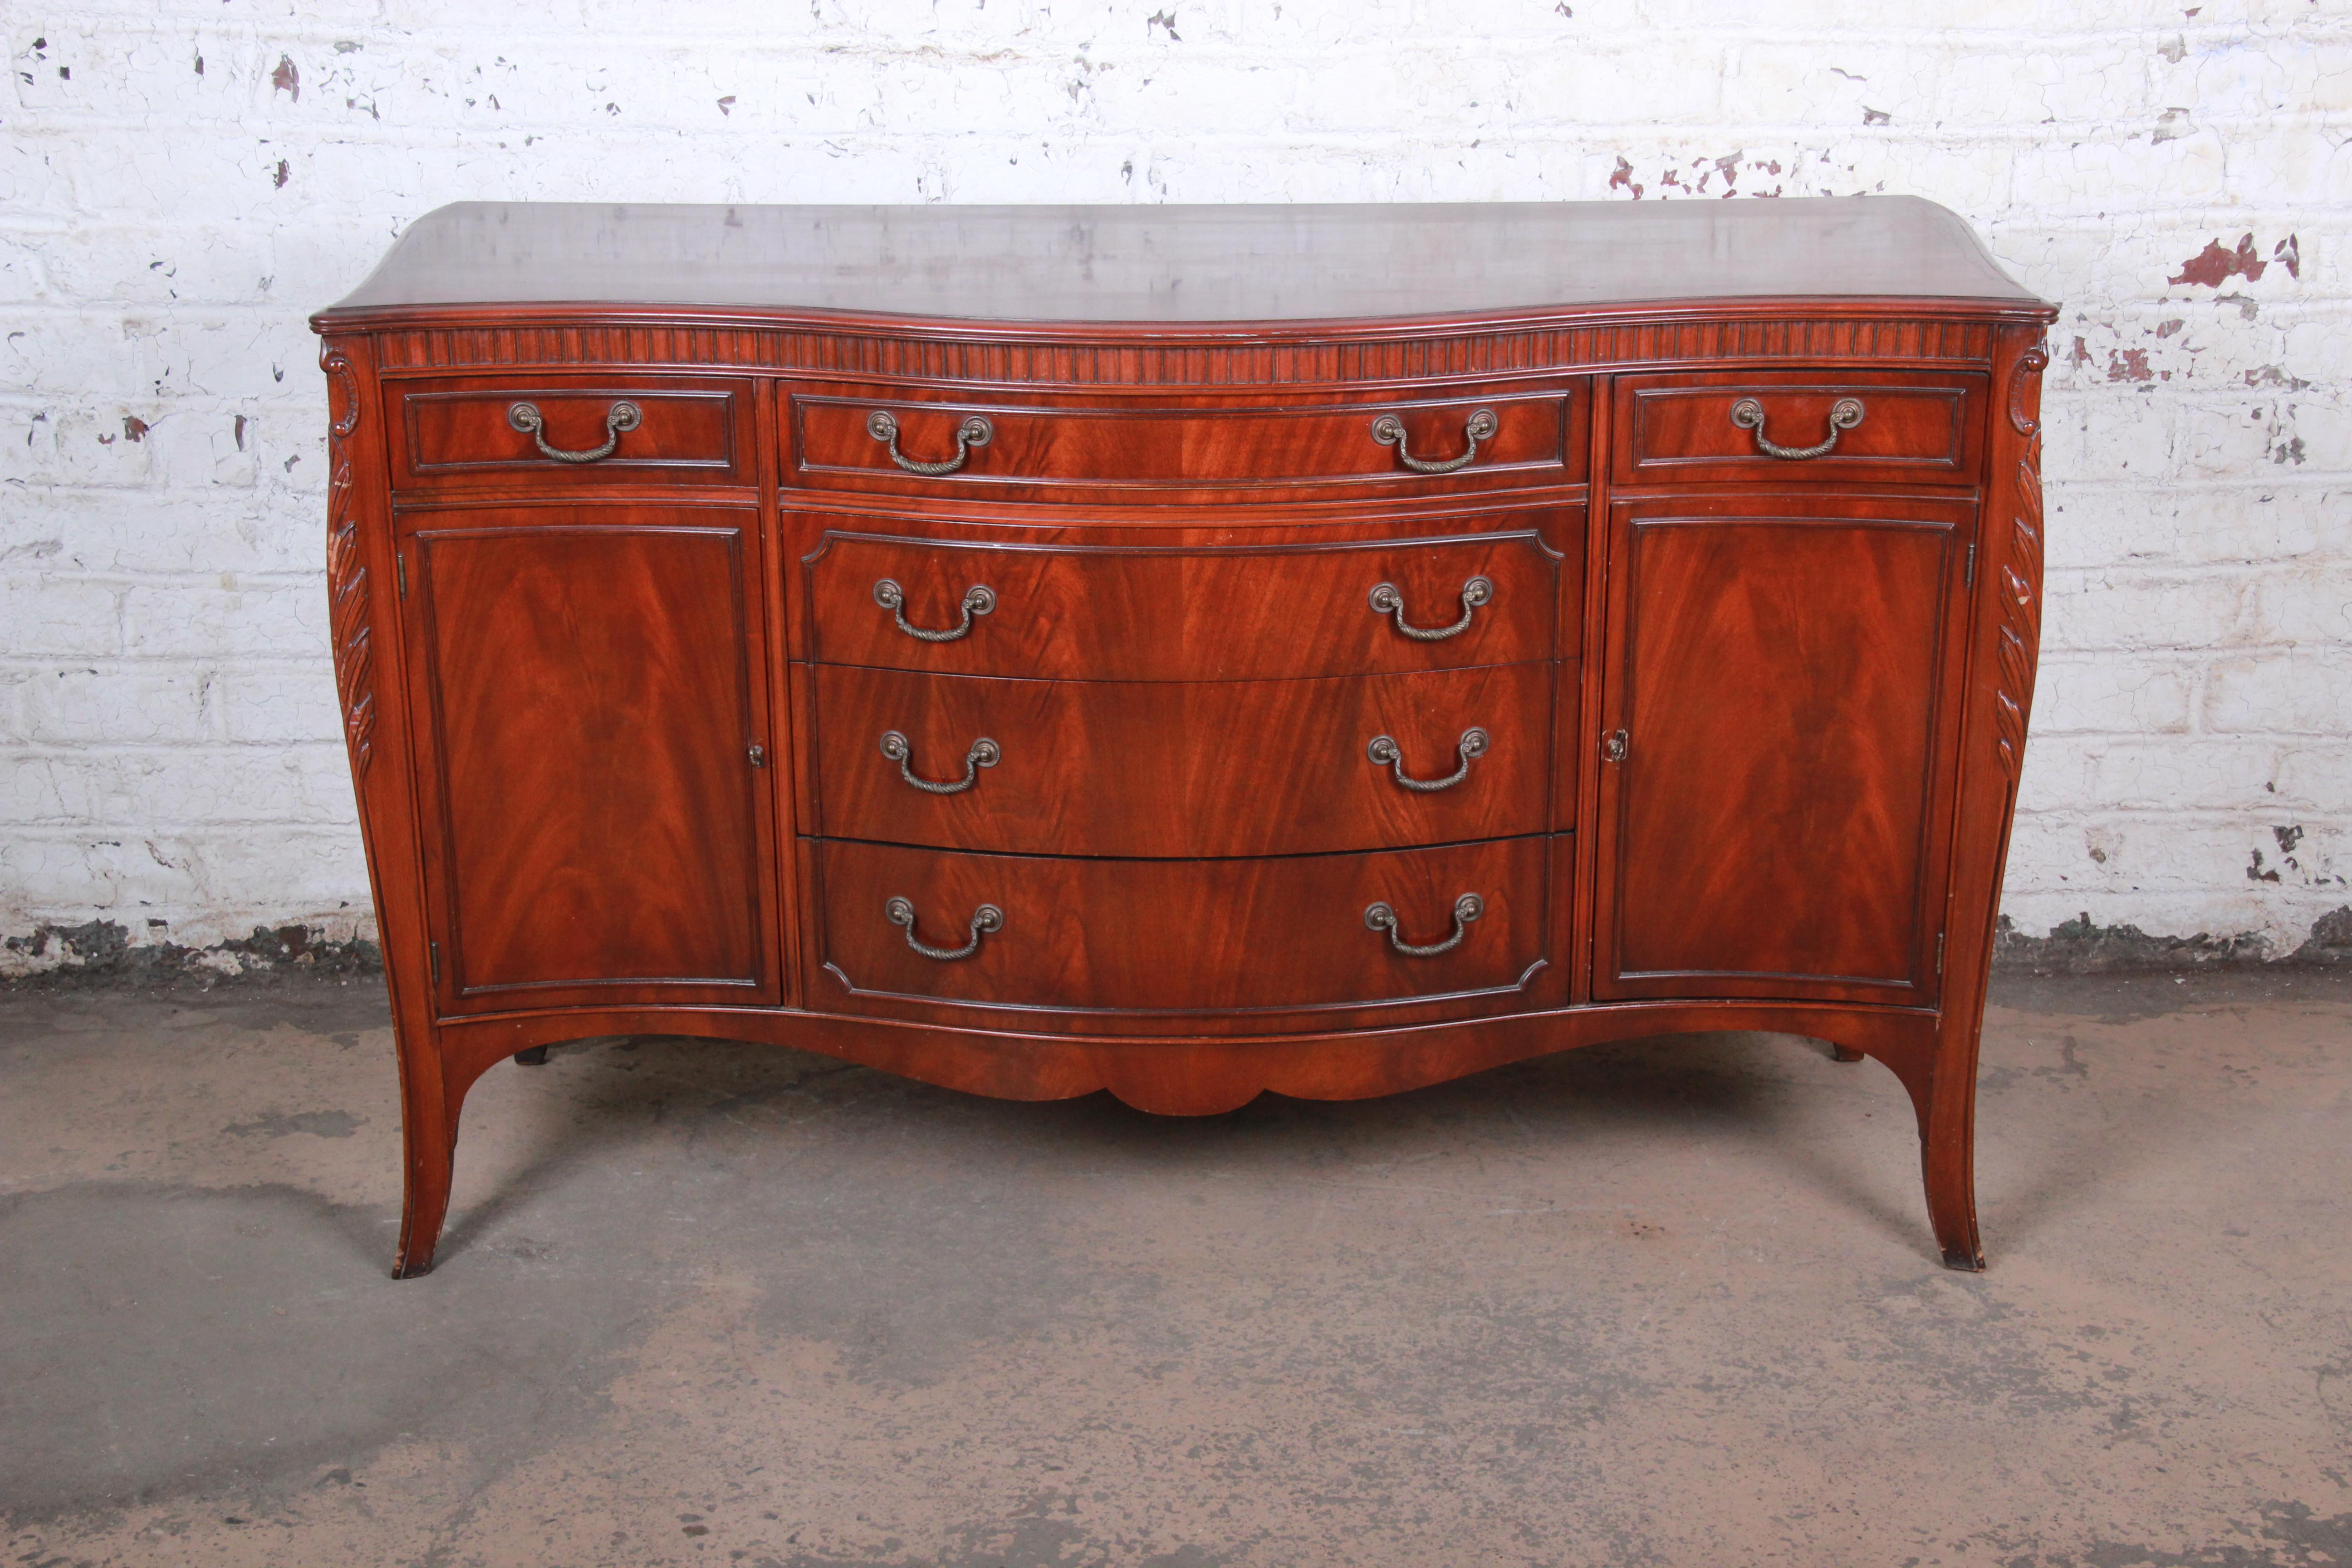 A gorgeous vintage bow front French carved sideboard or credenza by Drexel Furniture. The sideboard features stunning flame mahogany wood grain and nice carved wood details. It offers ample storage, with six dovetailed drawers and two shelved